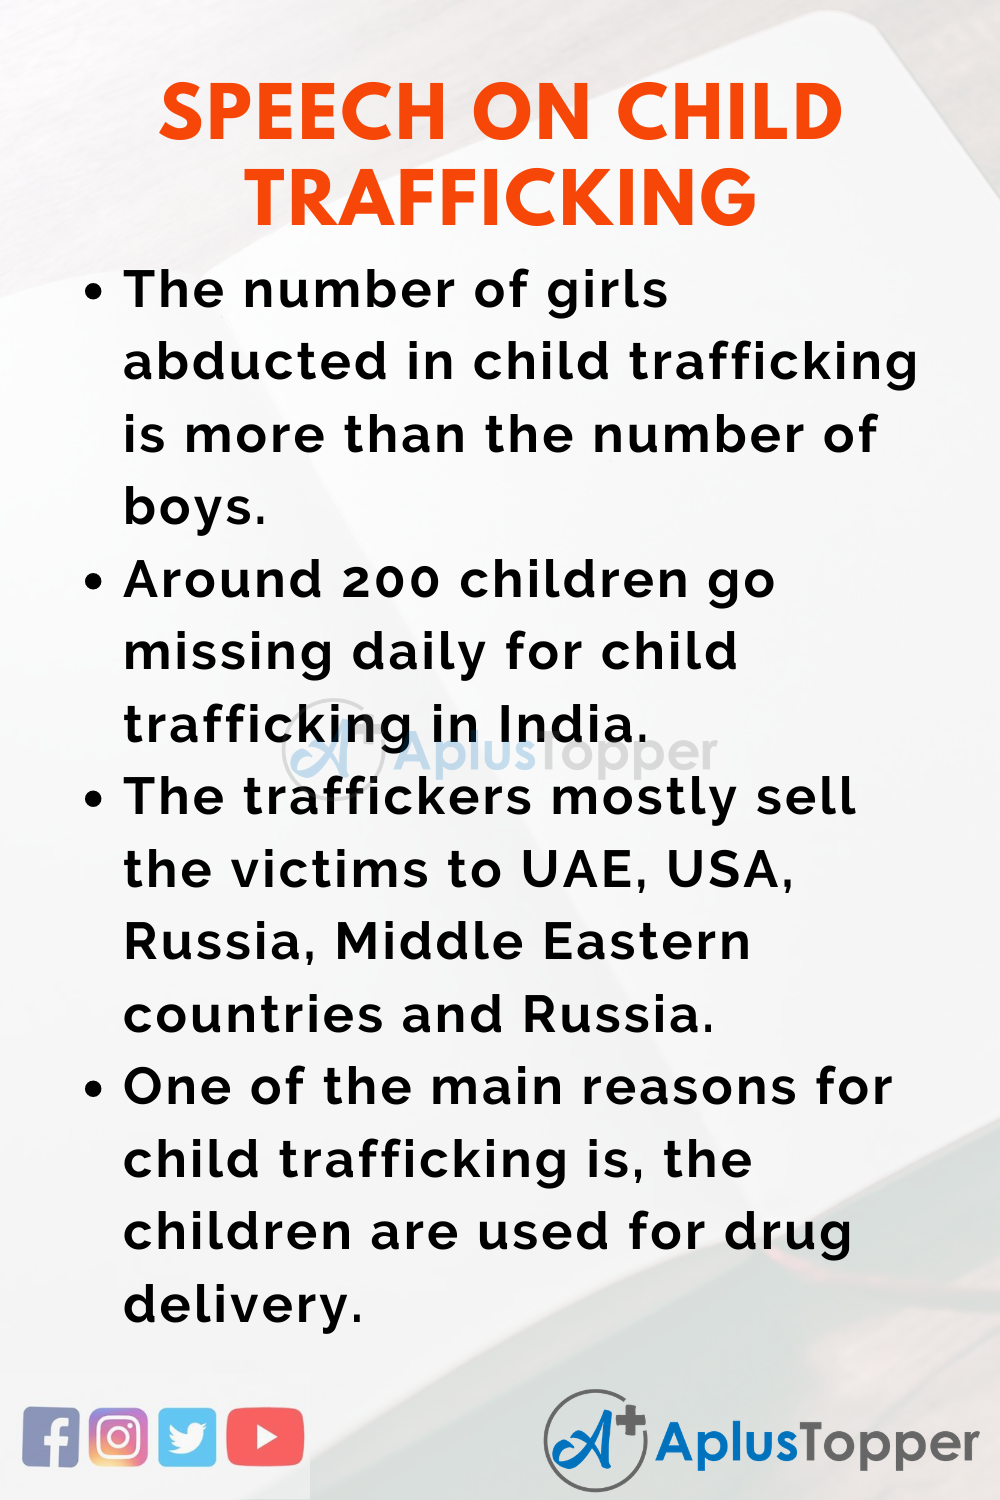 introduction to human trafficking essay